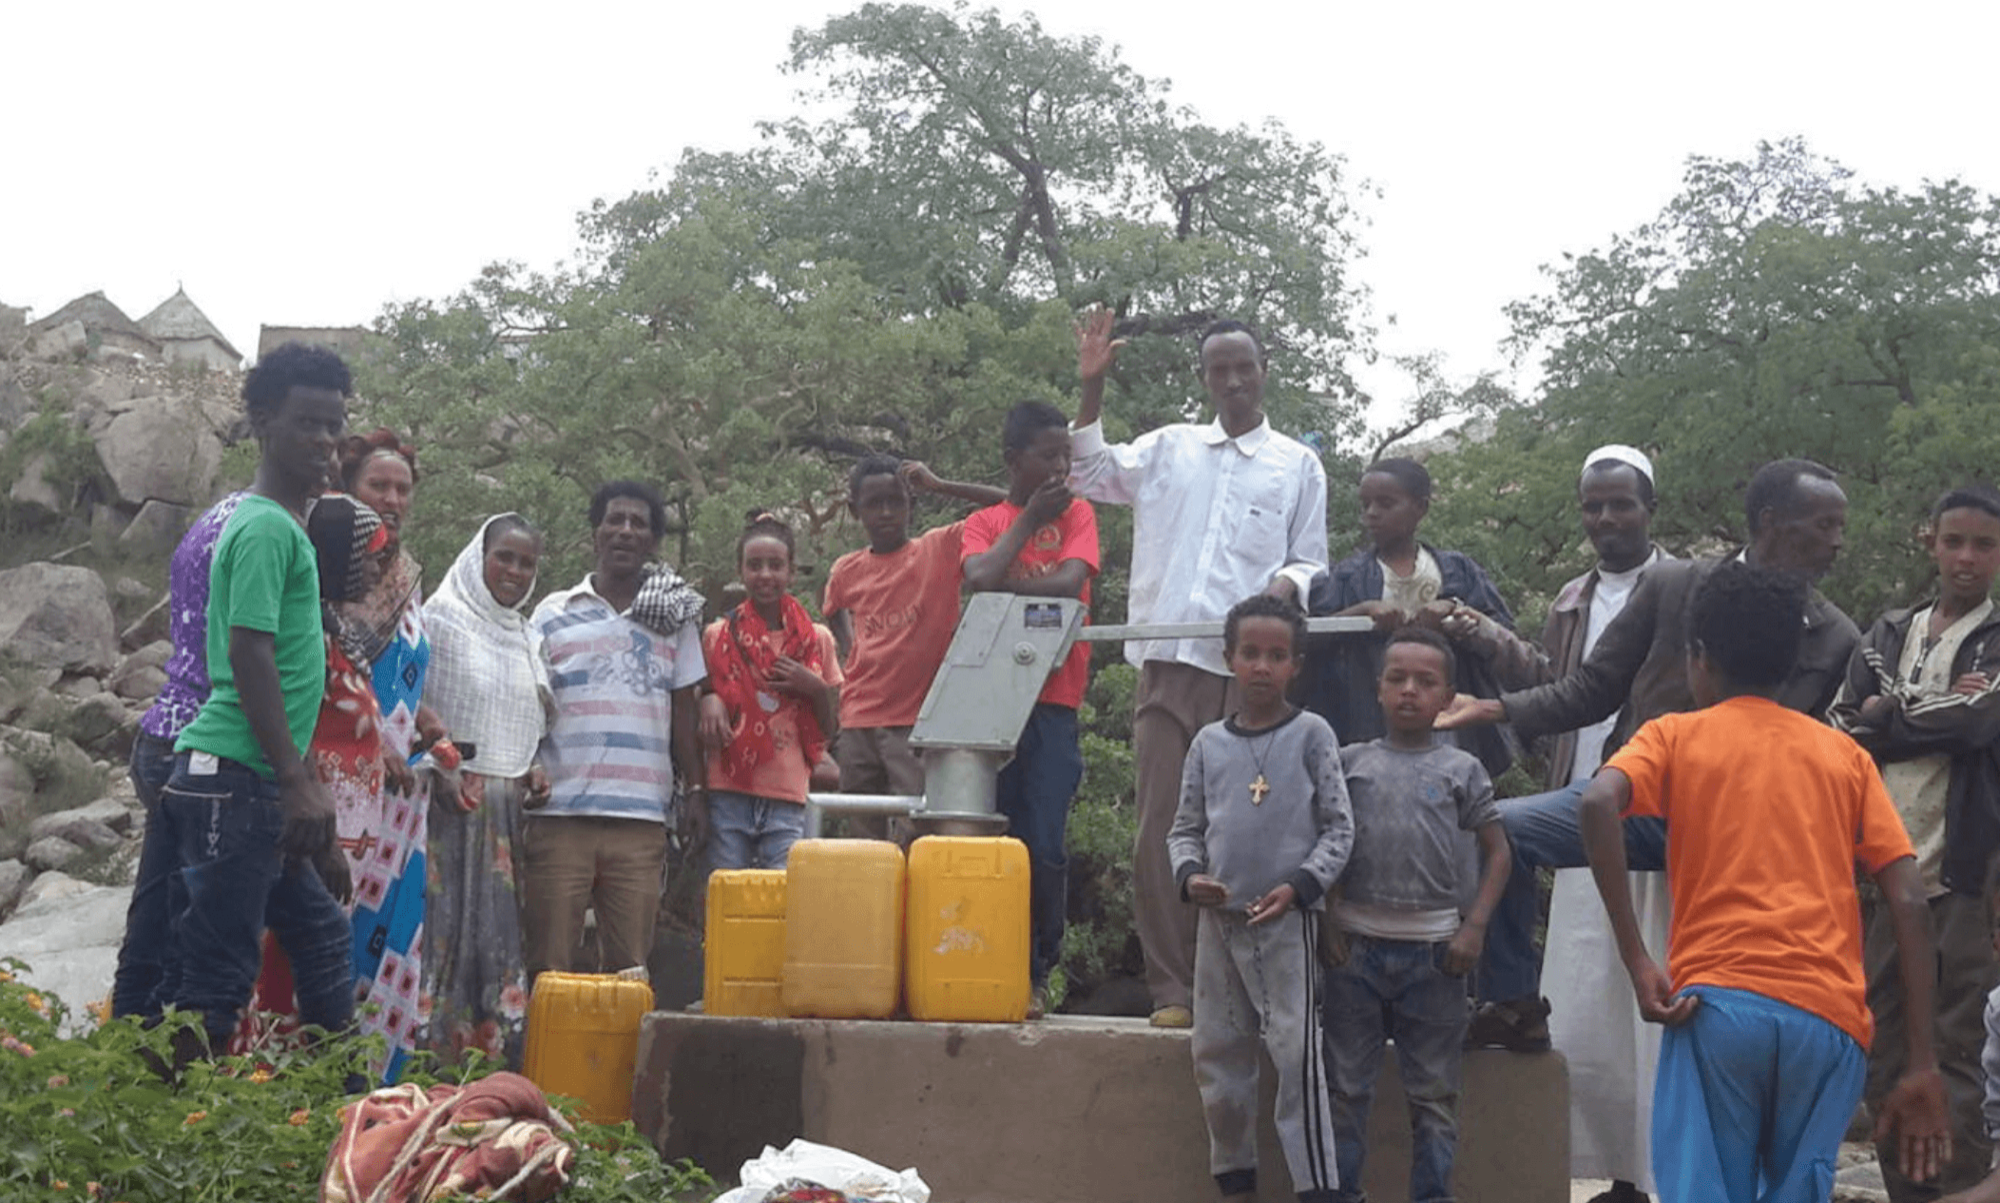 Xander Kostroma is Helping Eritrea Access Clean Water and Fight Climate Change